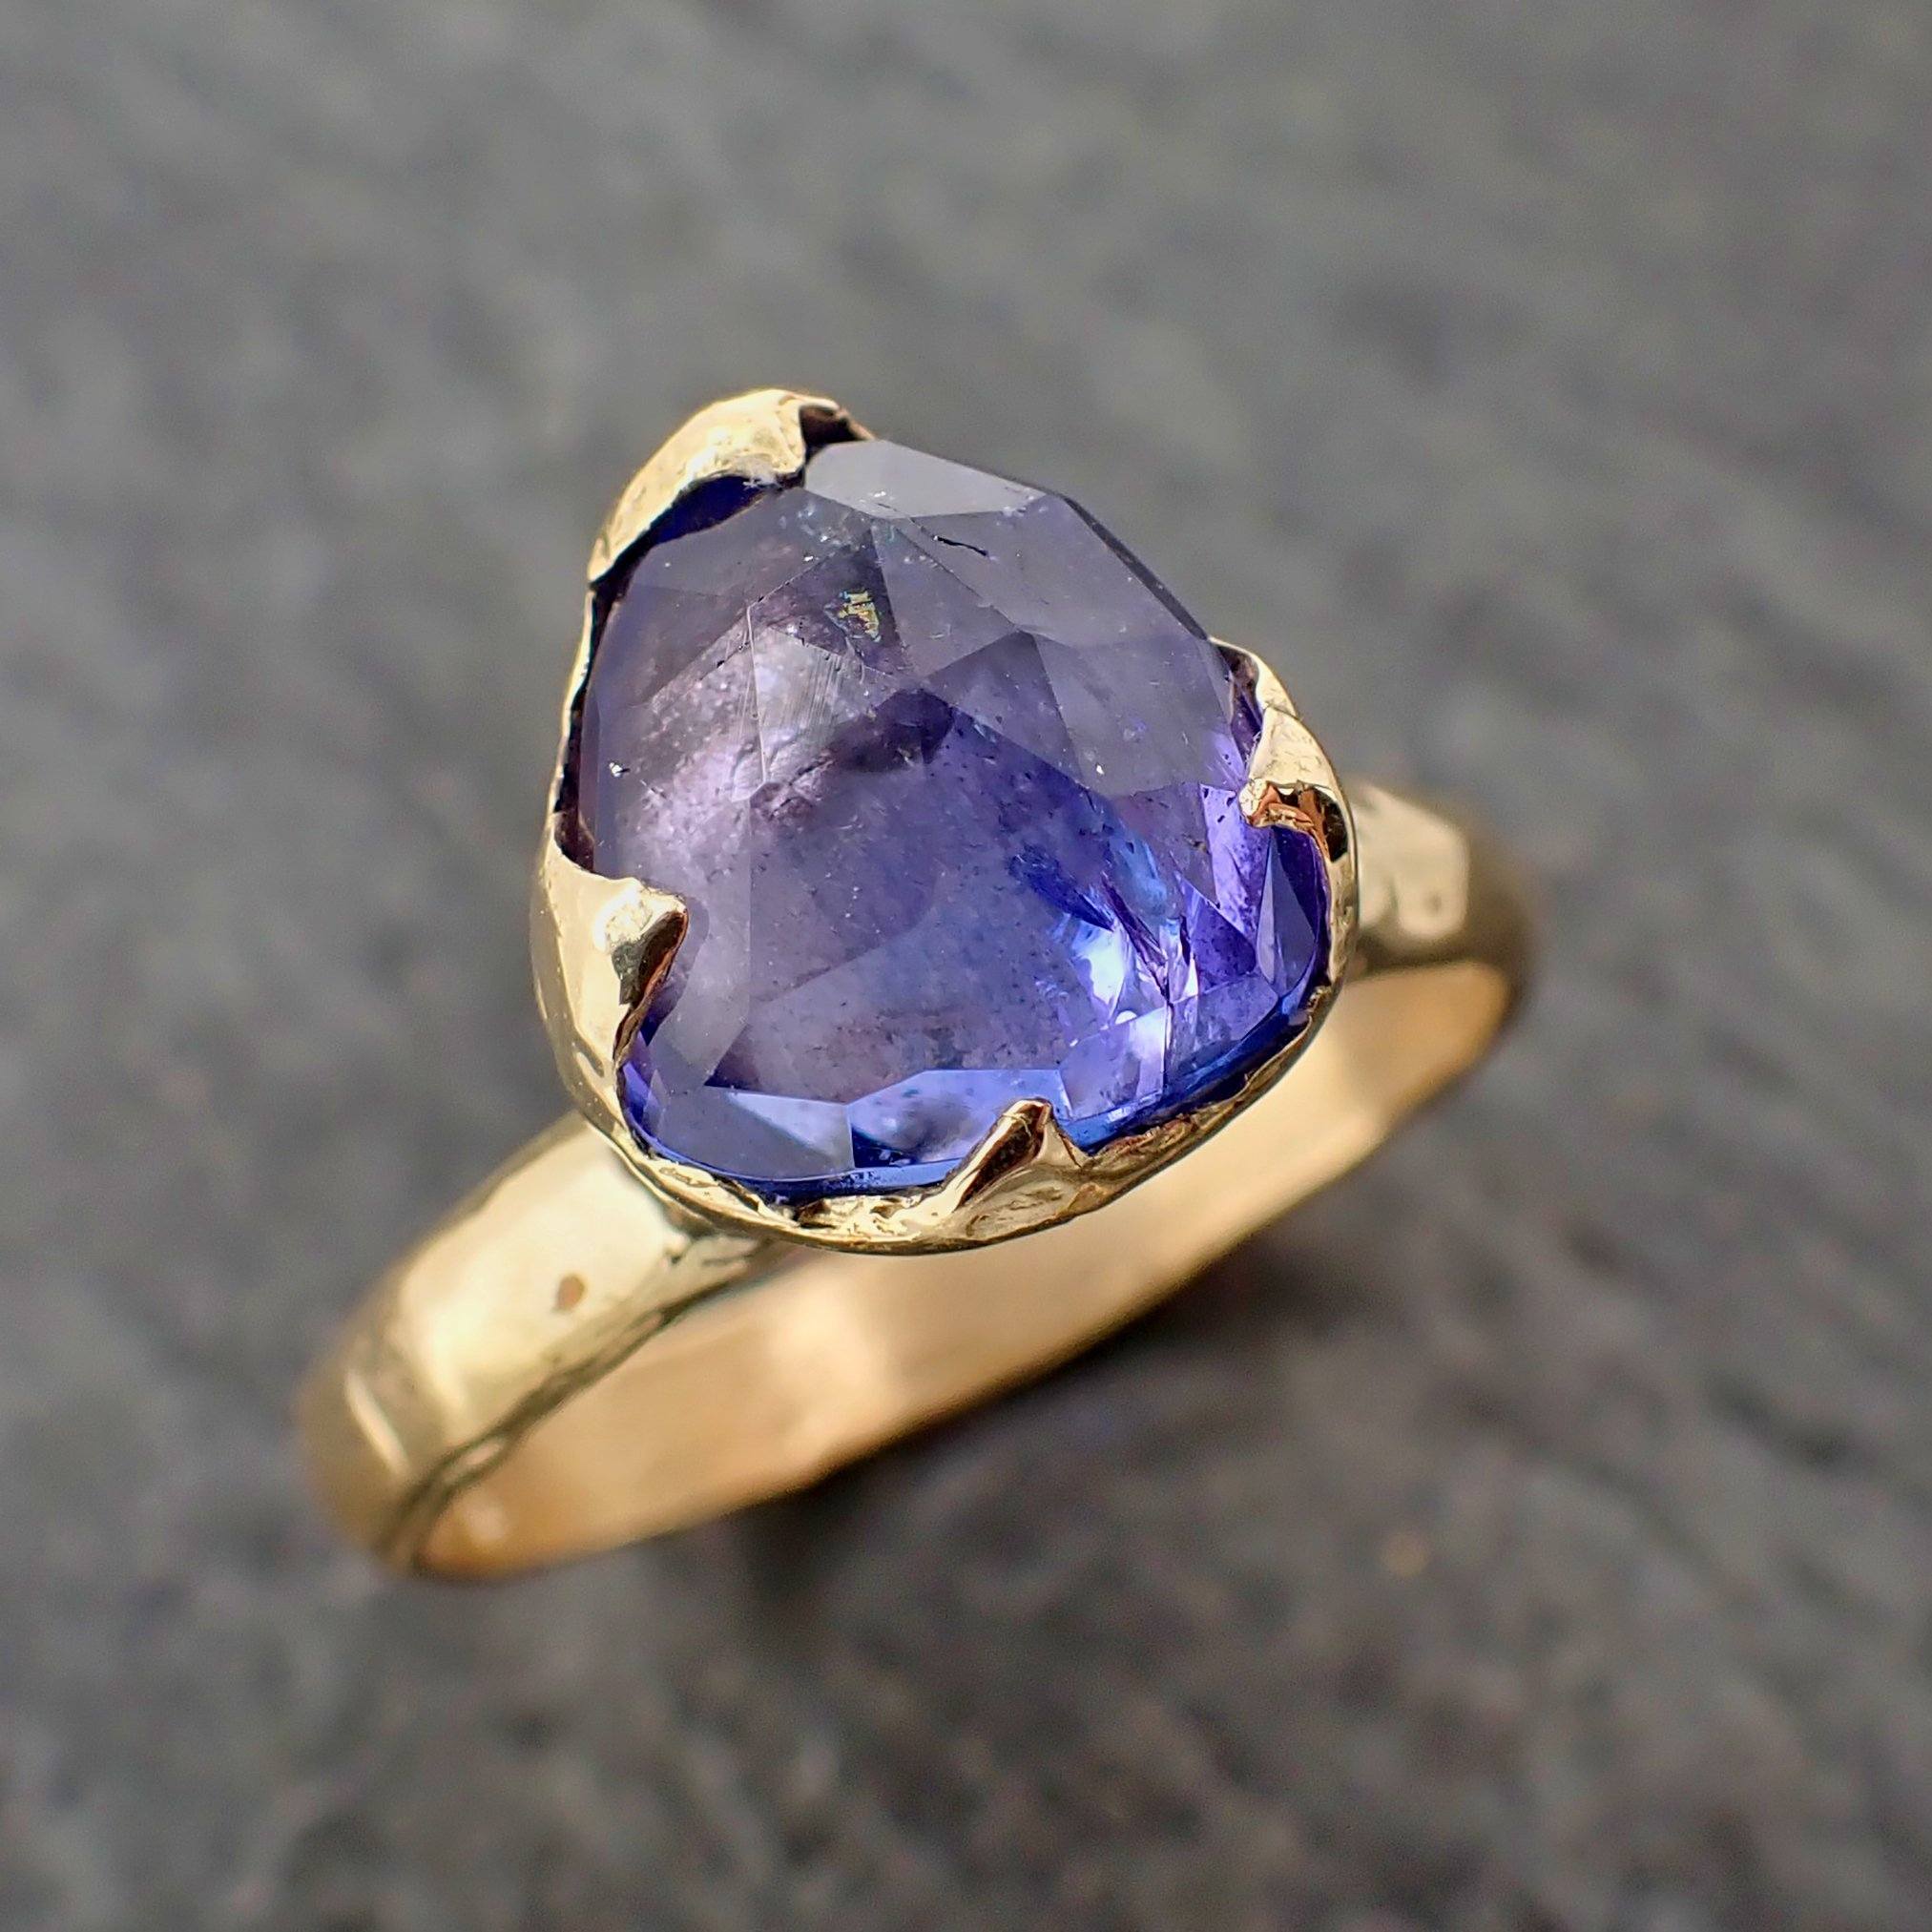 Fancy cut Tanzanite Crystal Solitaire 18k recycled yellow Gold Ring Tanzanite stacking cocktail statement byAngeline 2185